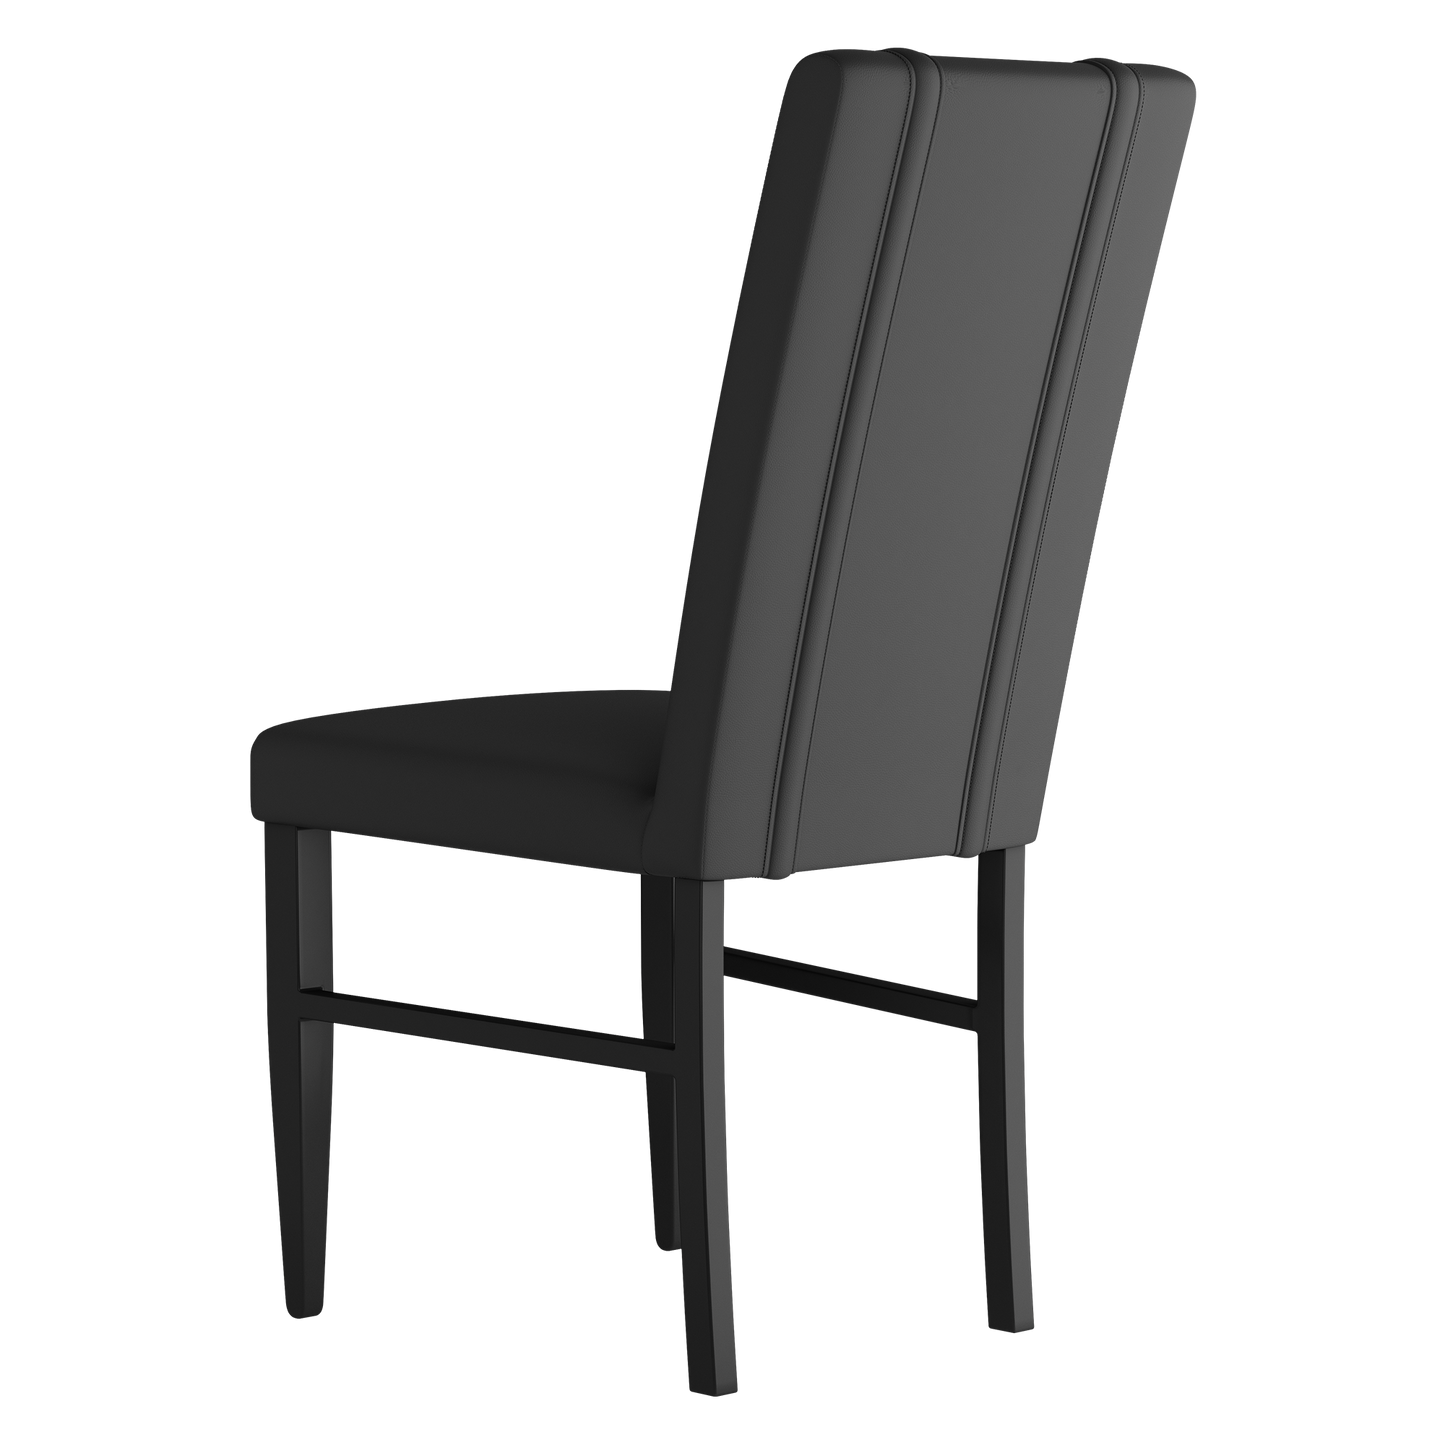 Side Chair 2000 with Chihuahua Logo Panel Set of 2